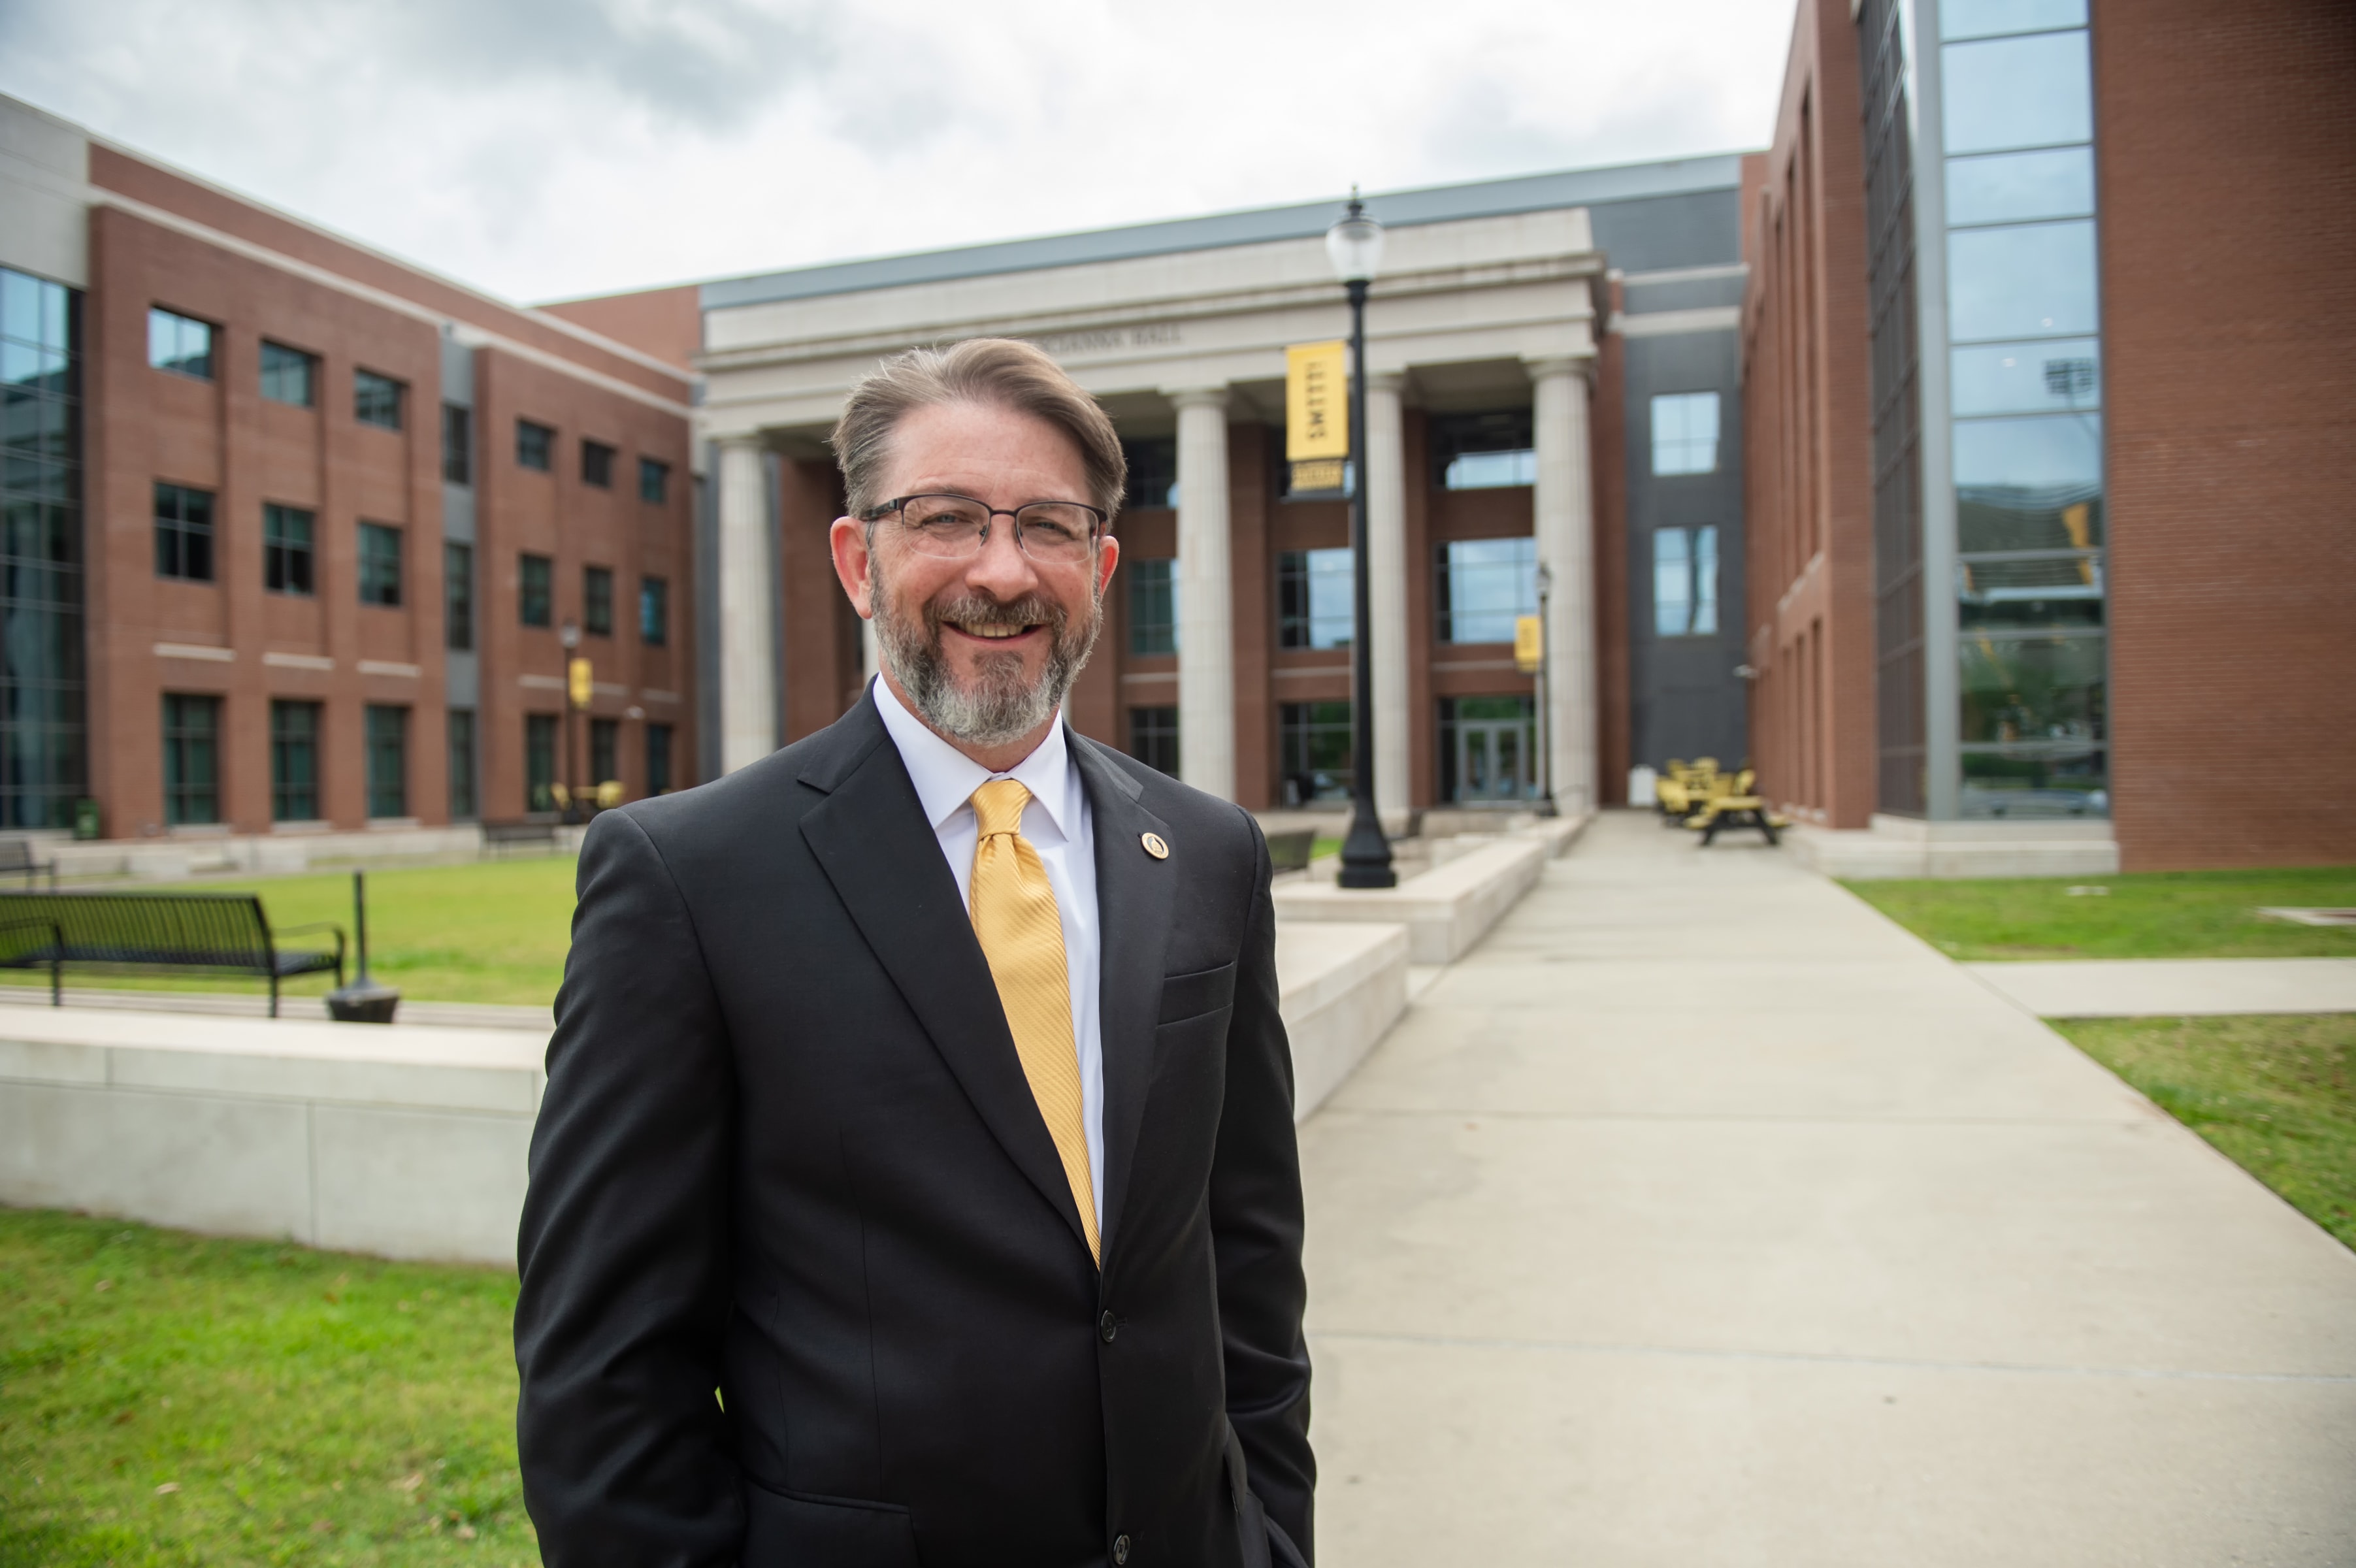 Dr. Bret Becton, Dean of the College of Business and Economic Development